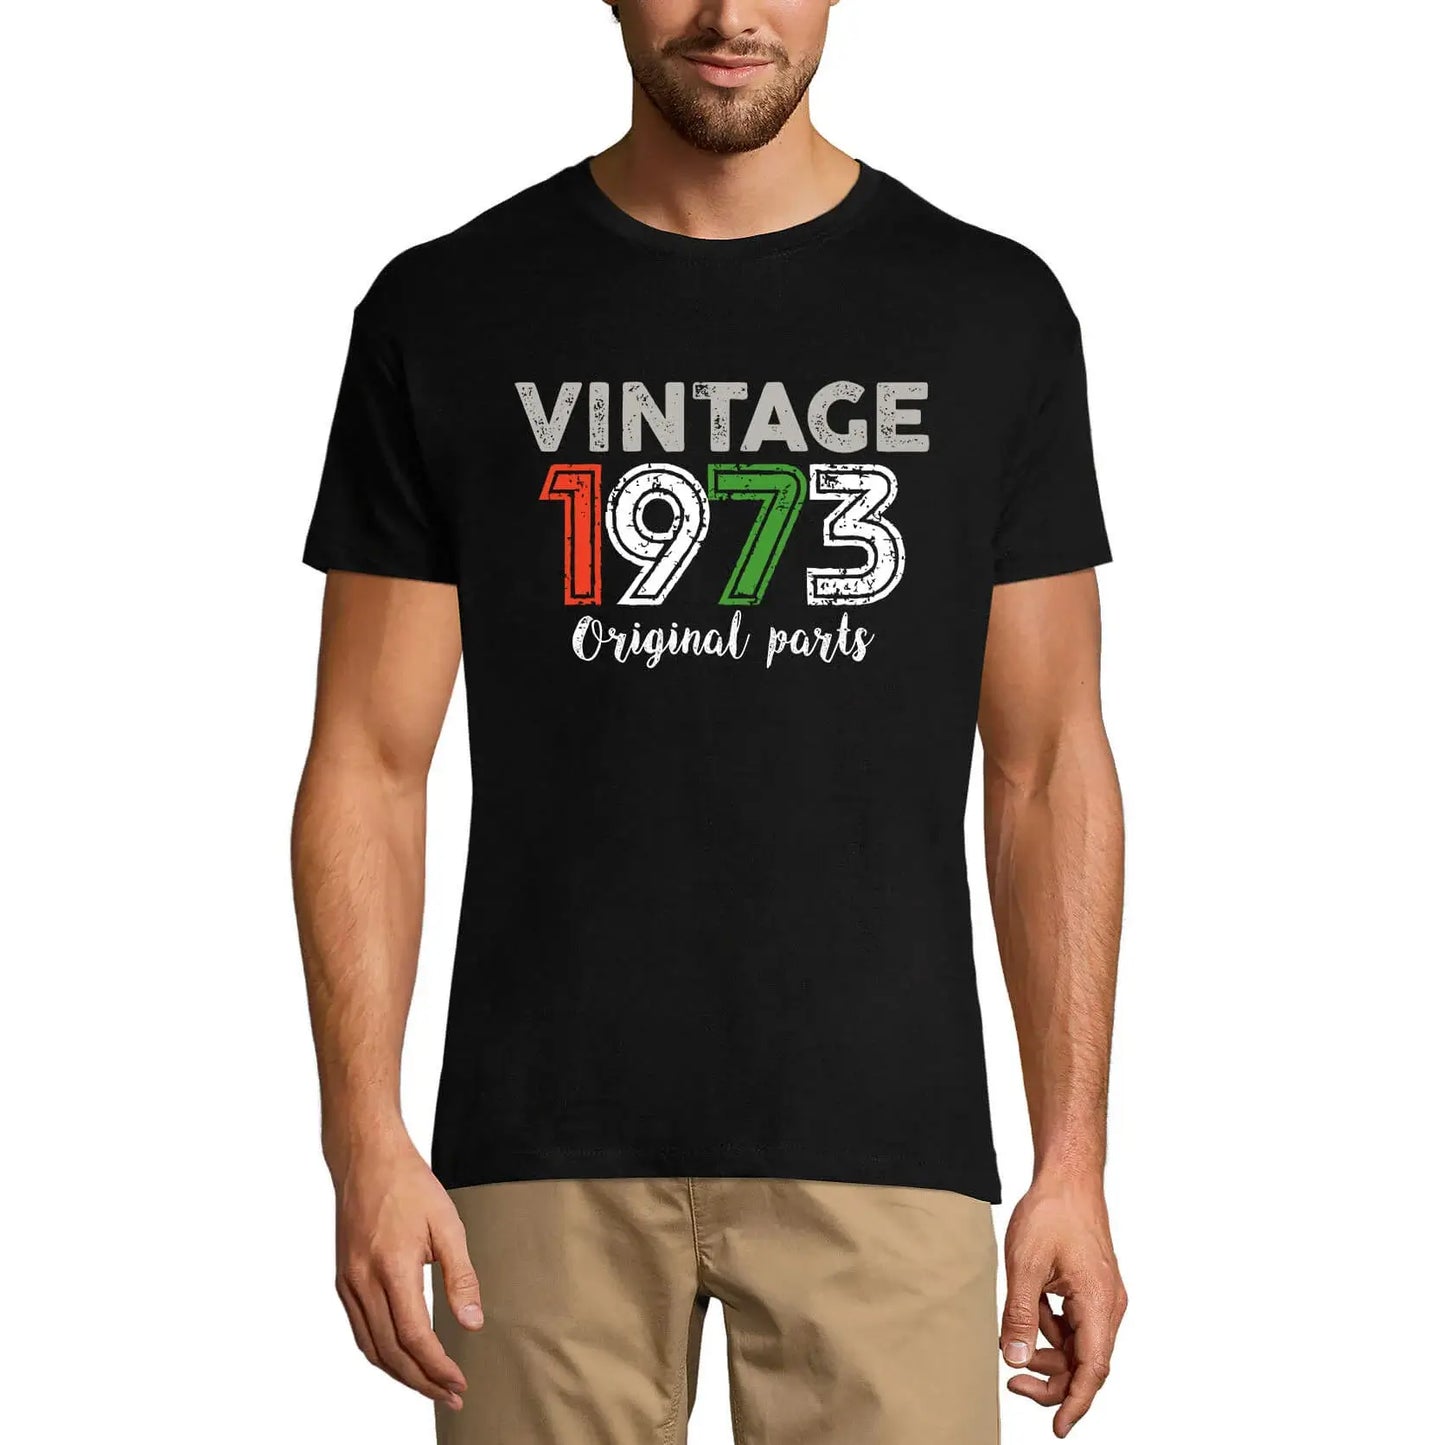 Men's Graphic T-Shirt Original Parts 1973 51st Birthday Anniversary 51 Year Old Gift 1973 Vintage Eco-Friendly Short Sleeve Novelty Tee